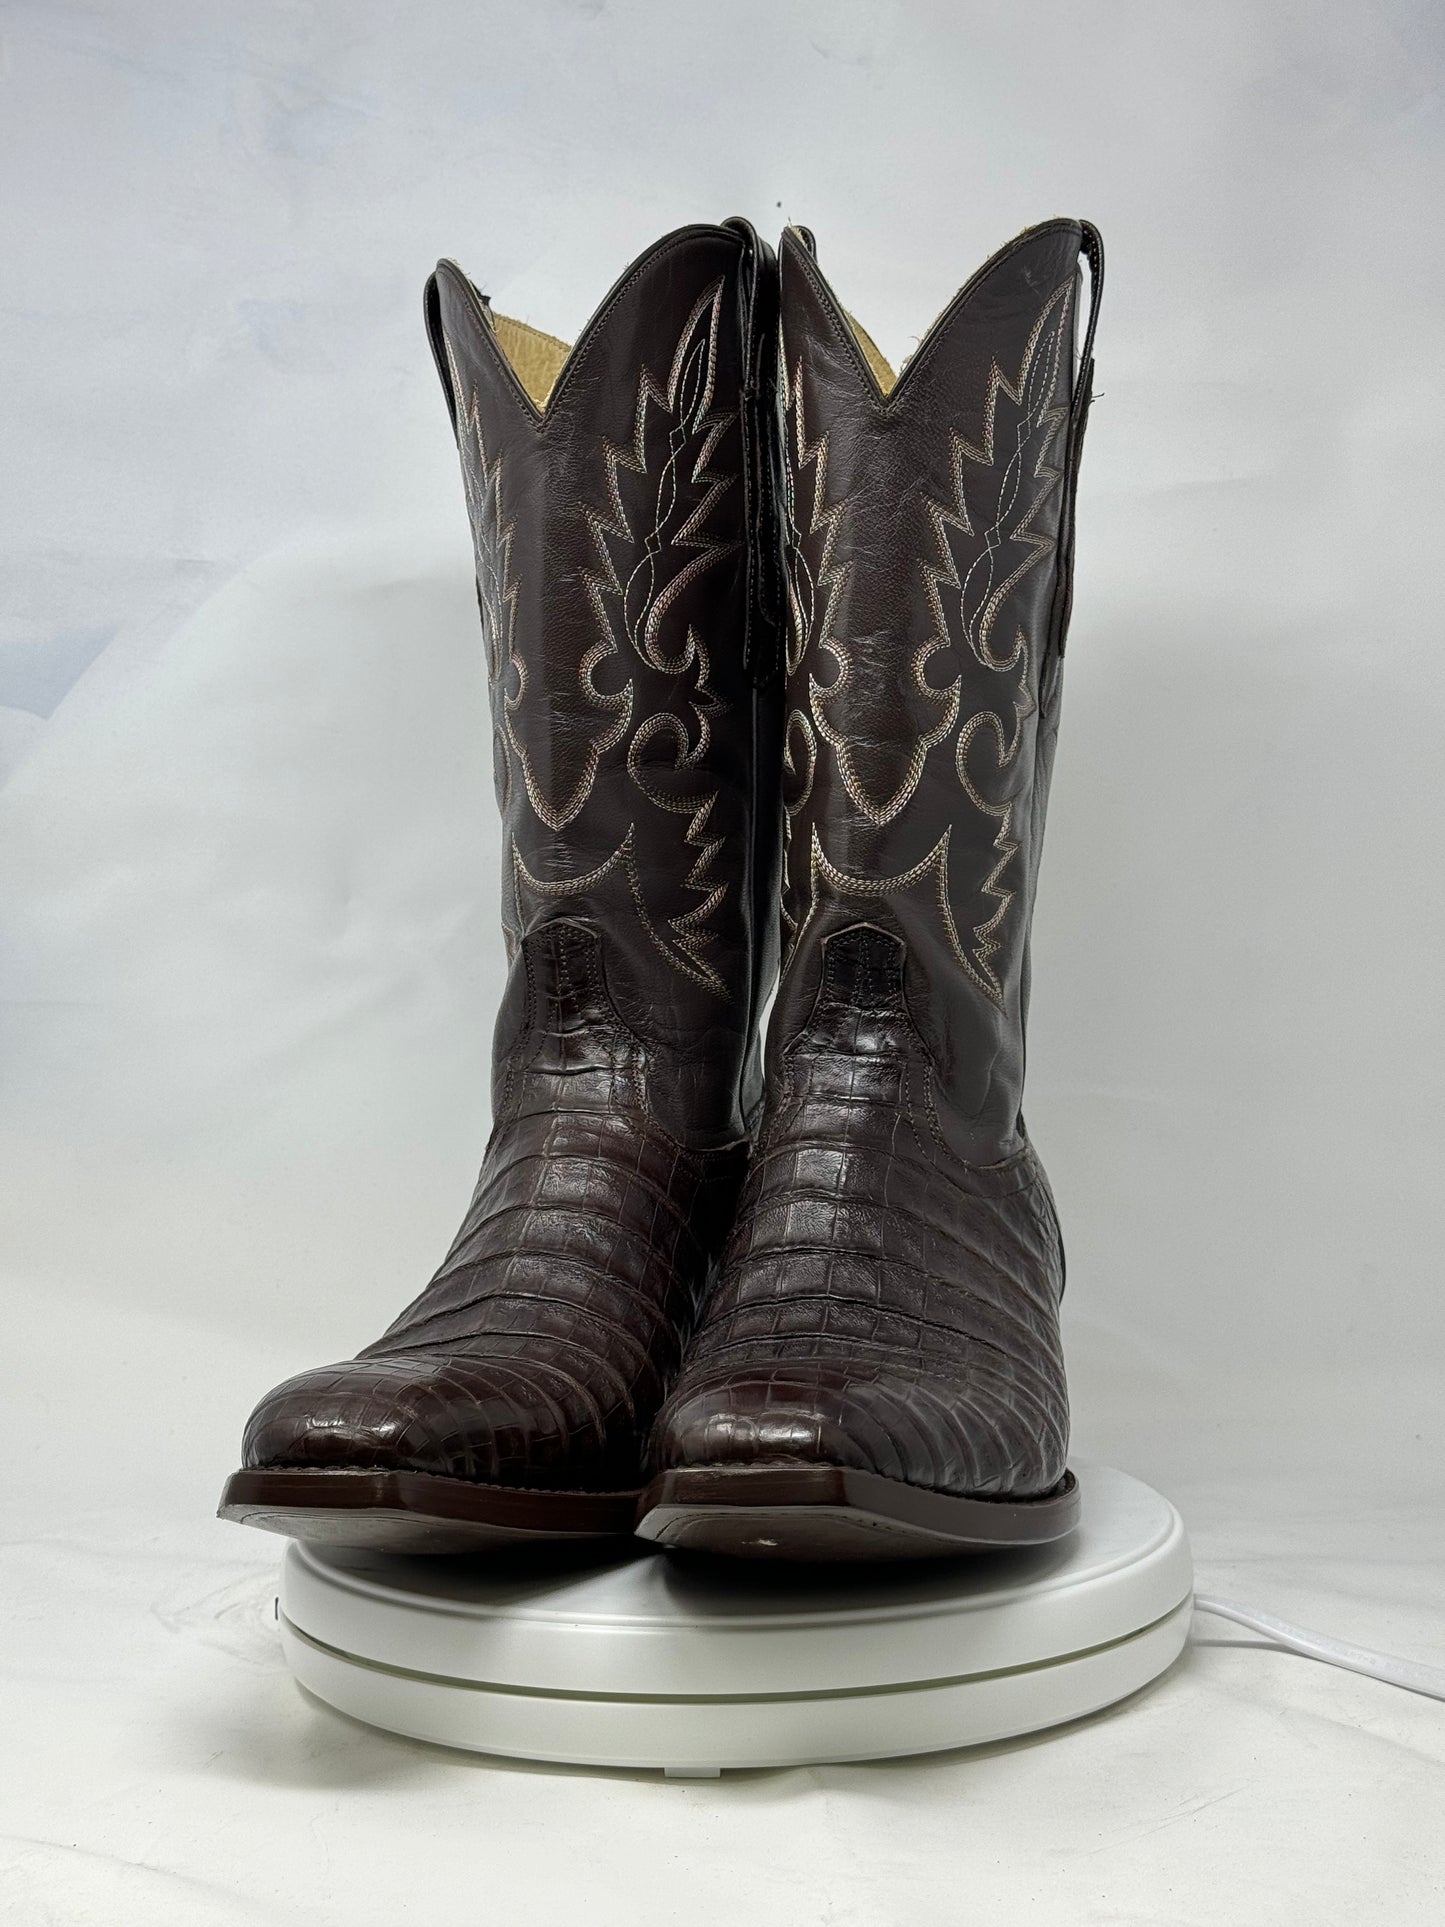 DJ2002 | Don Juan Boots Men's Caiman Belly Chocolate French Toe